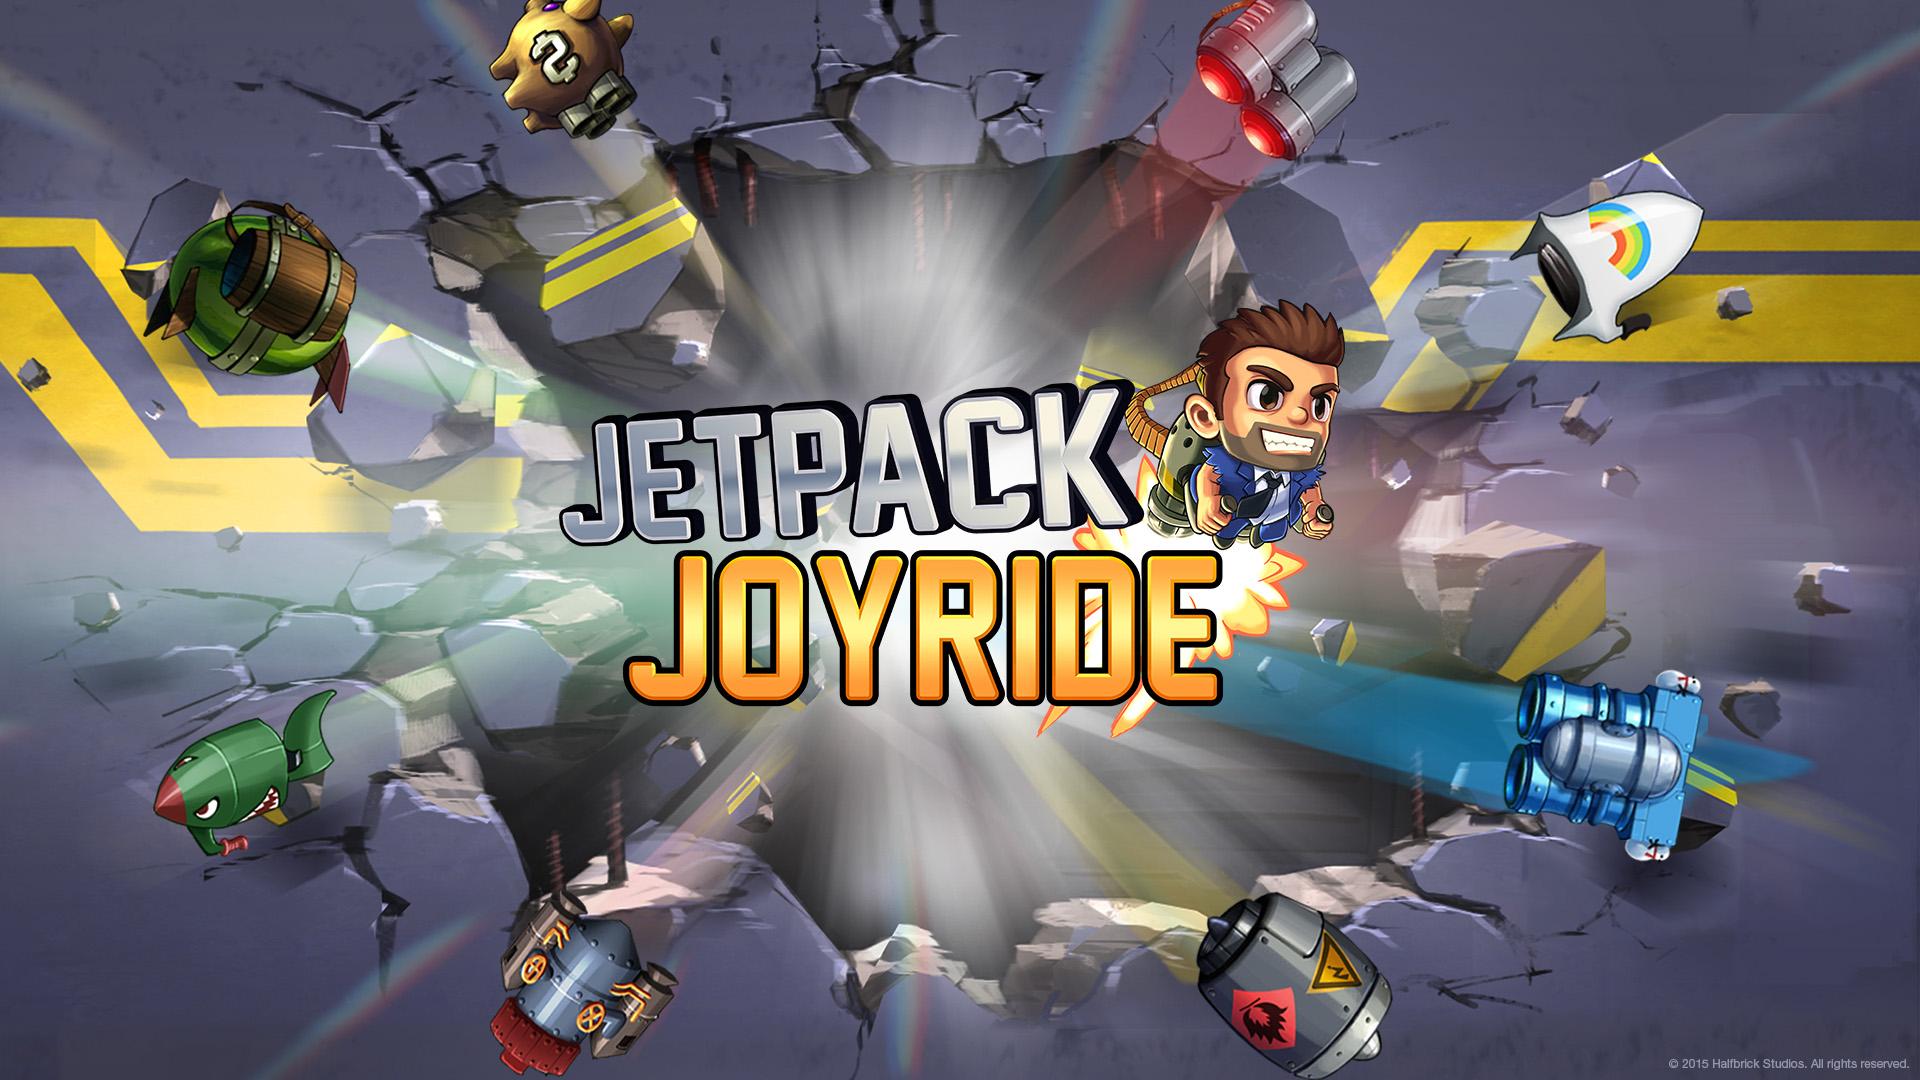 Jet Pack Wallpapers